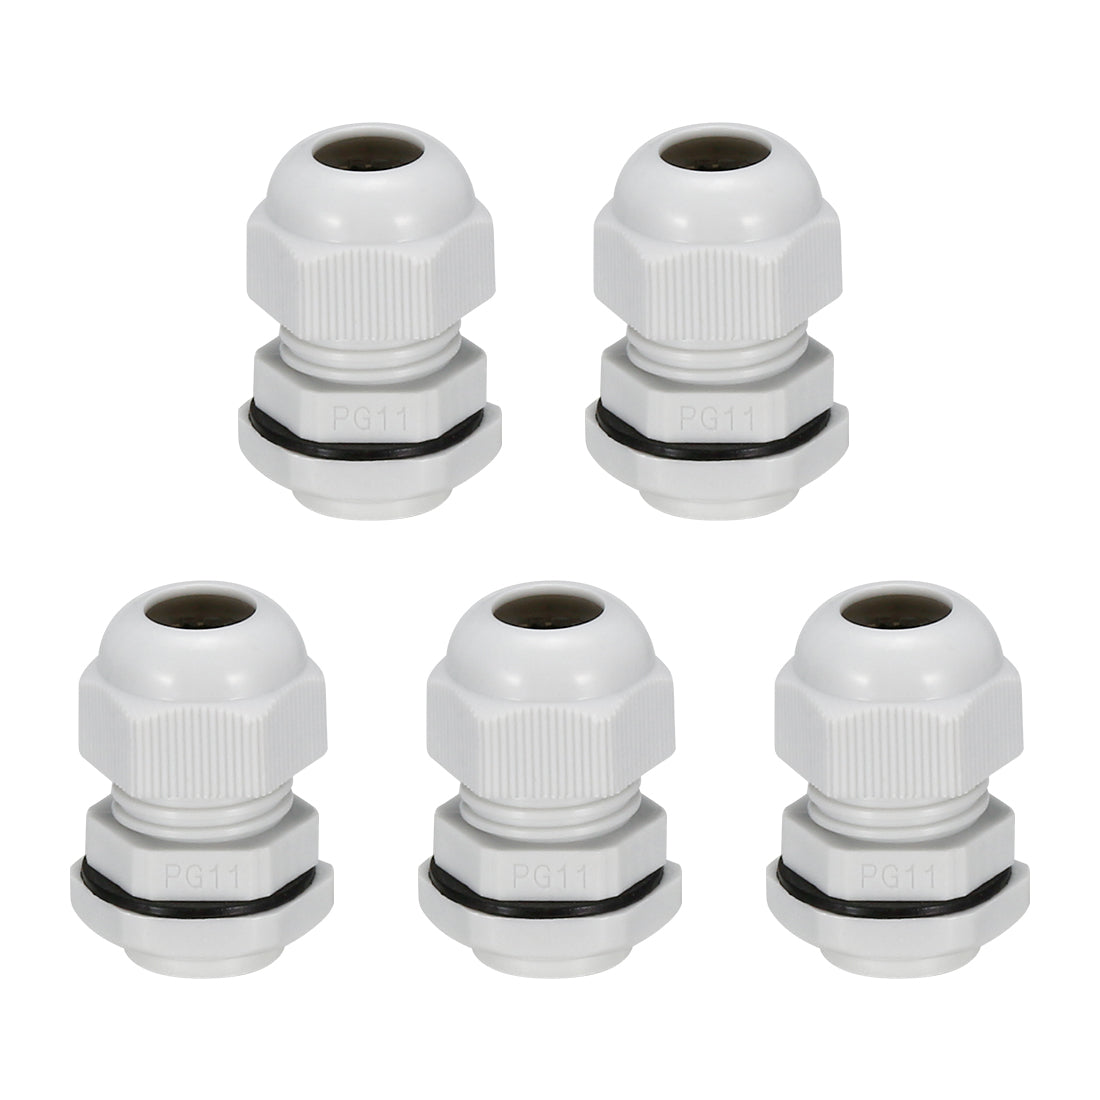 uxcell Uxcell 5Pcs PG11 Cable Gland Waterproof Plastic Joint Adjustable Locknut White for 5mm-10mm Dia Cable Wire